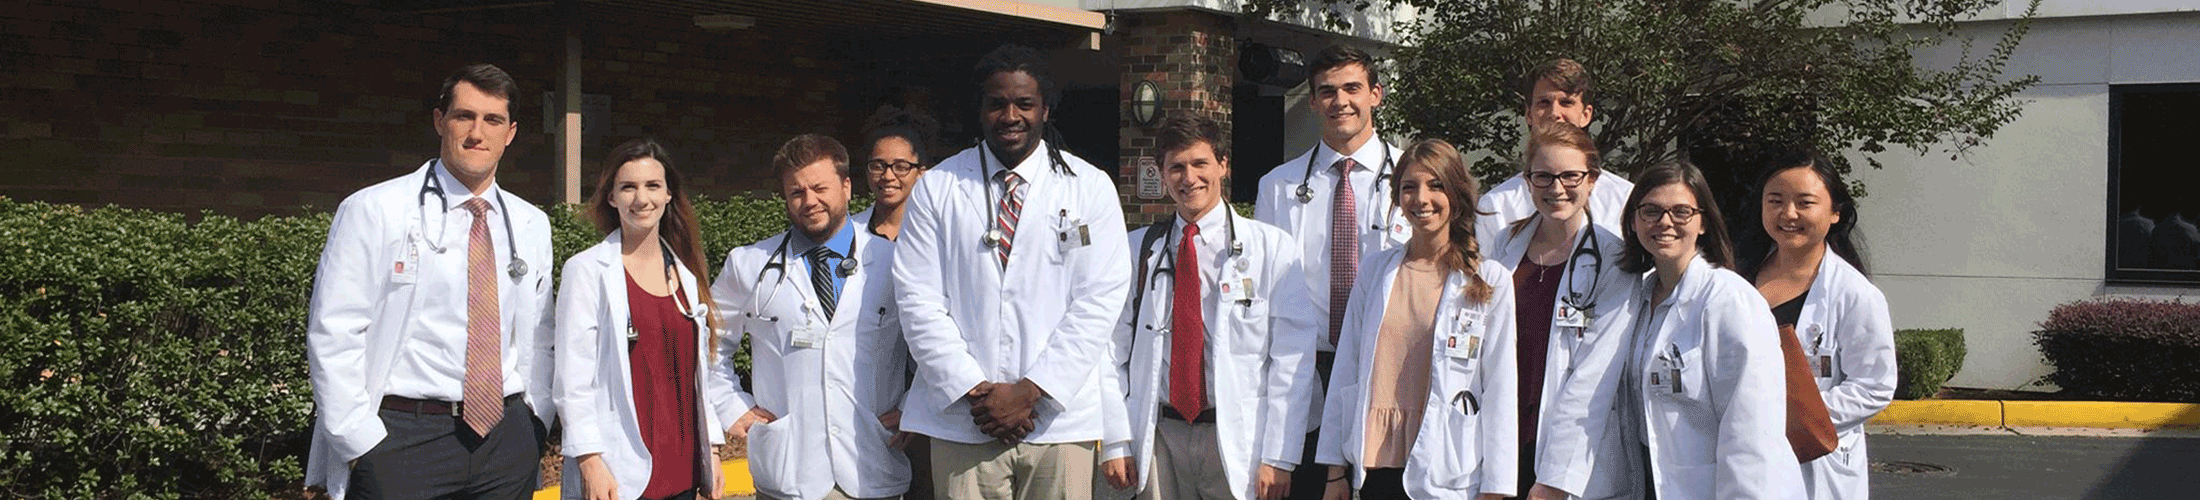 Medical students standing in front of the College of Medicine